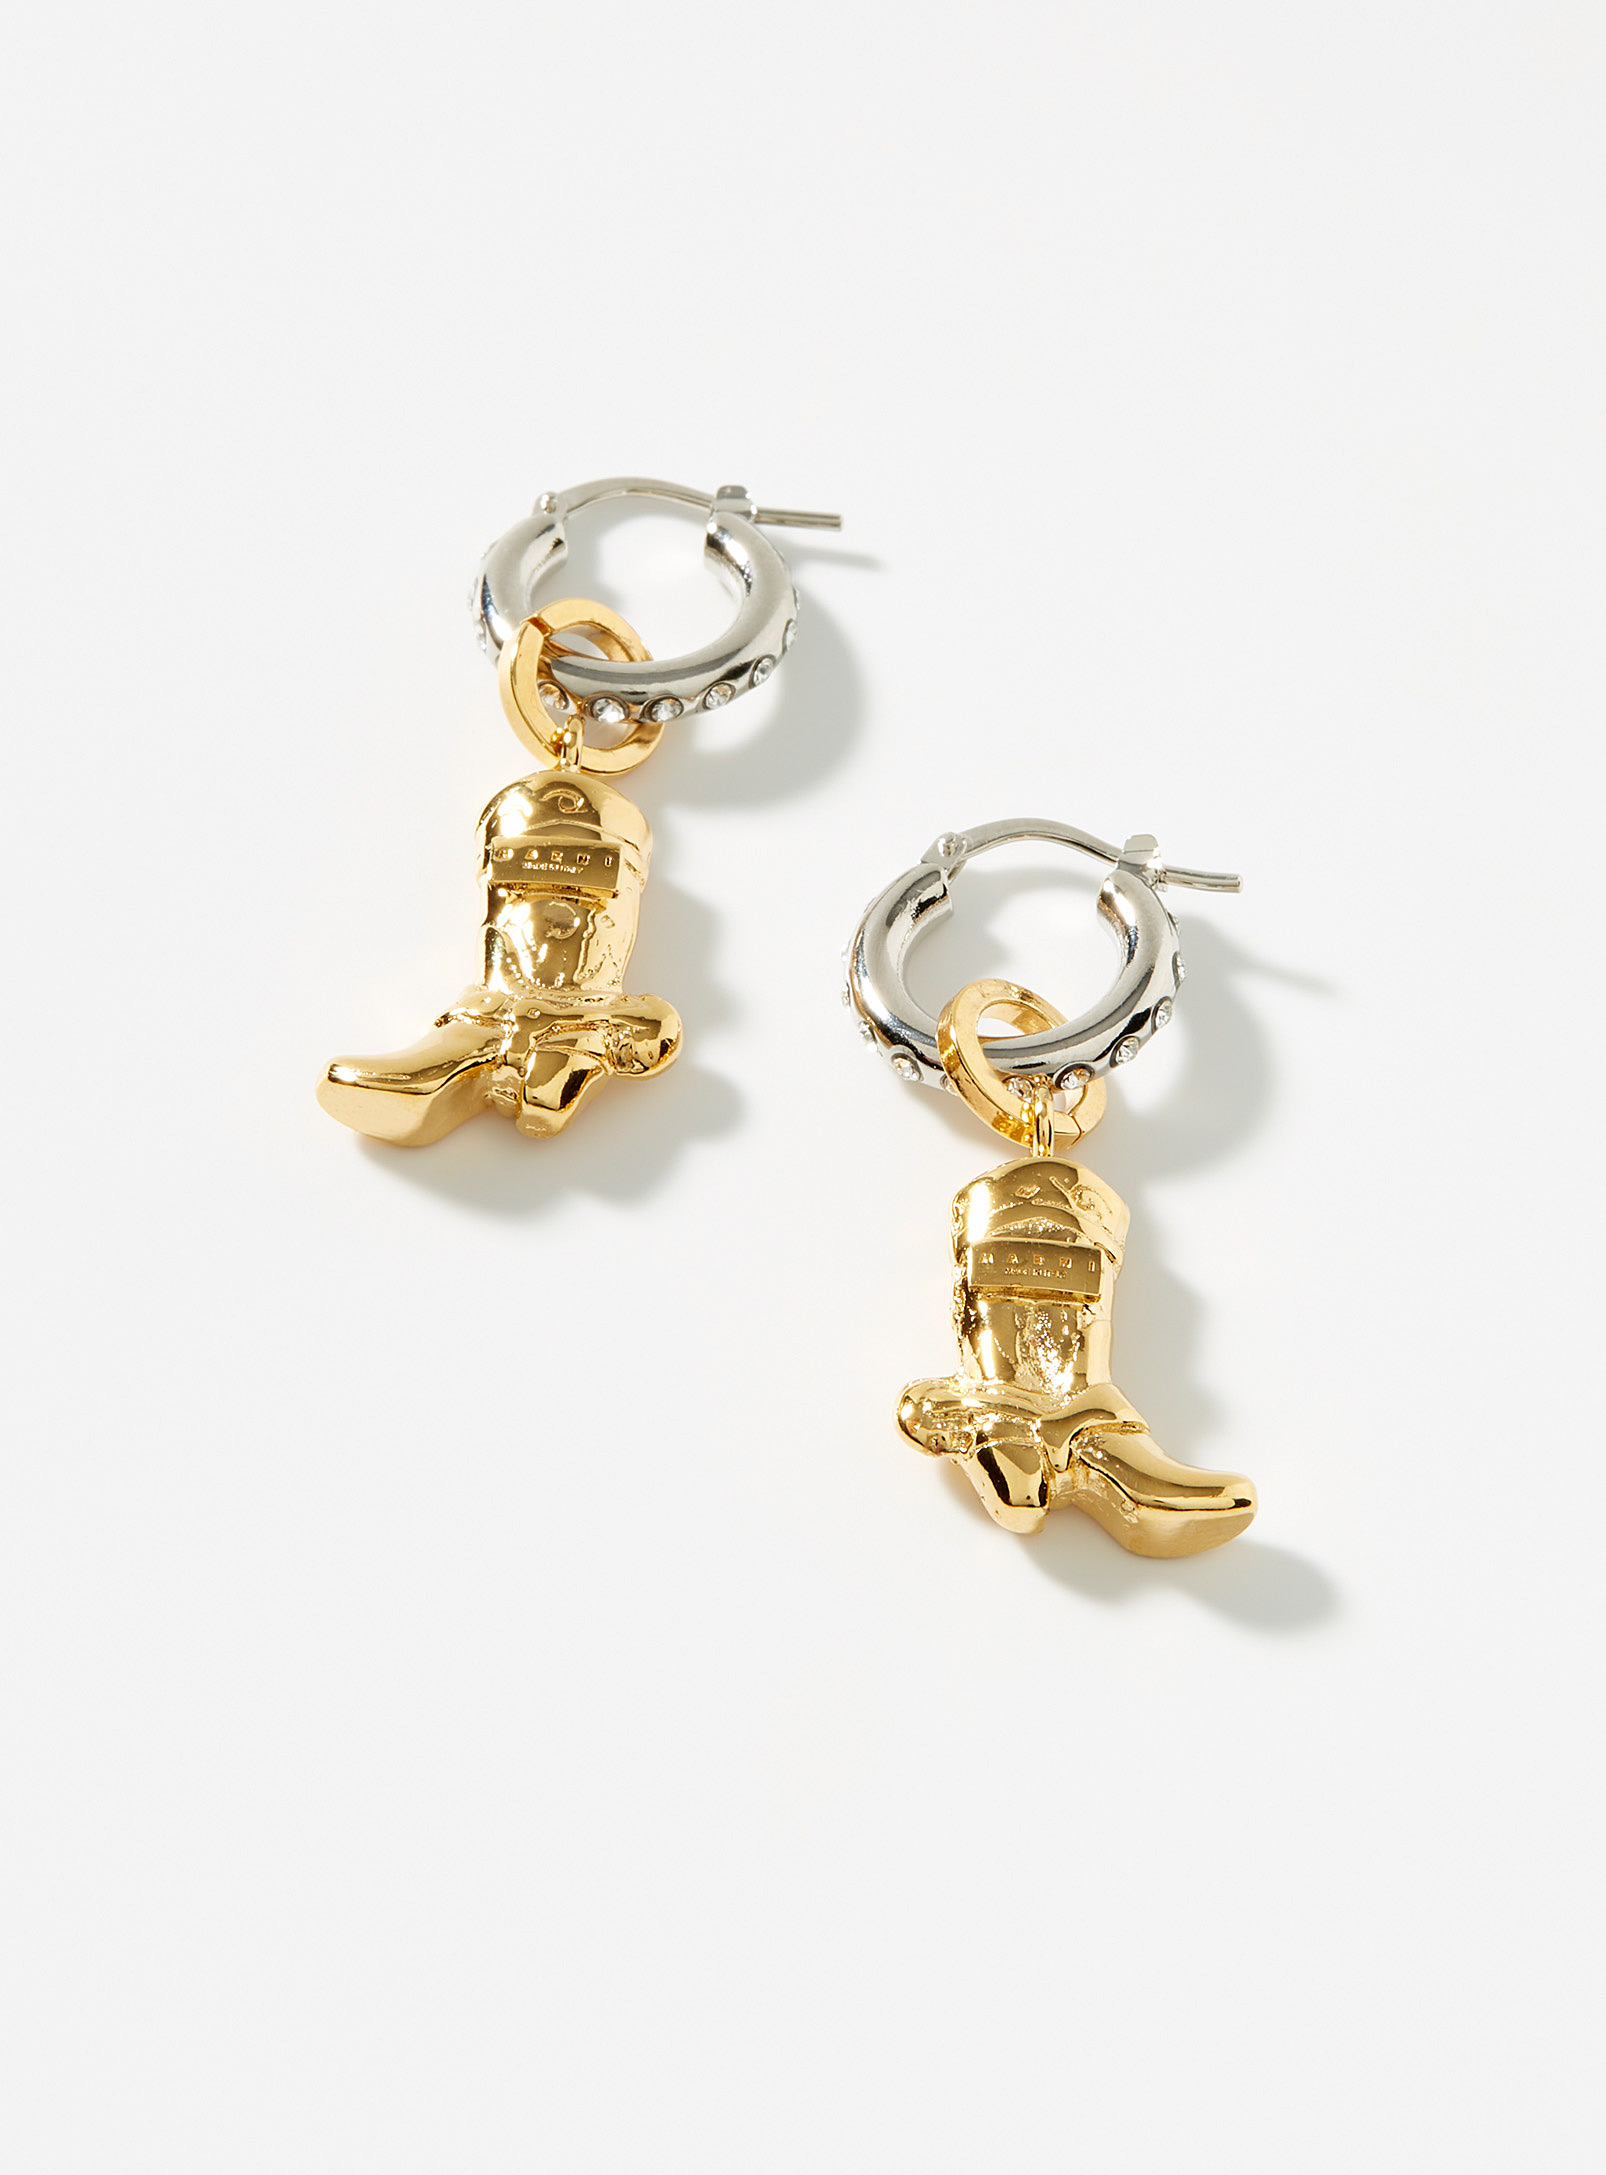 Marni Cowboy Boot Earrings In Assorted